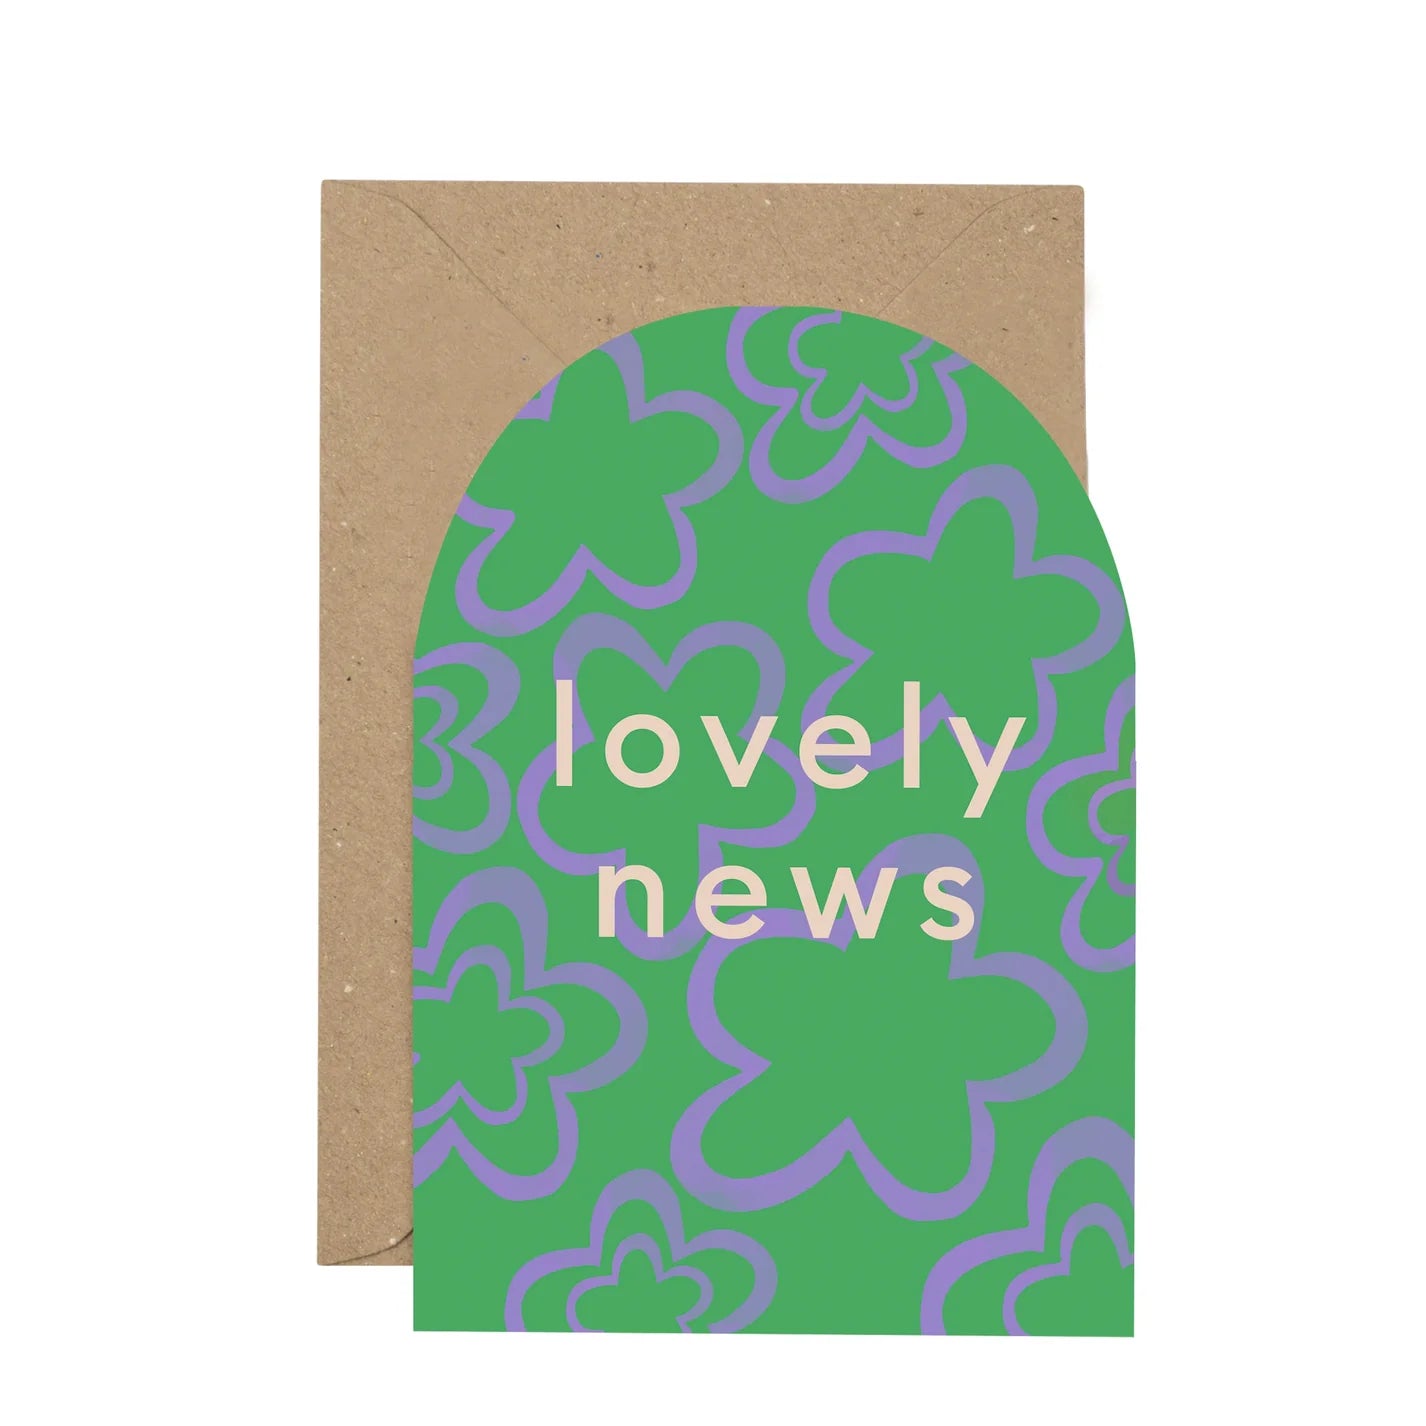 Curved card and brown envelope against white background. The words lovely news printed on the card which is a green and purple squiggle pattern